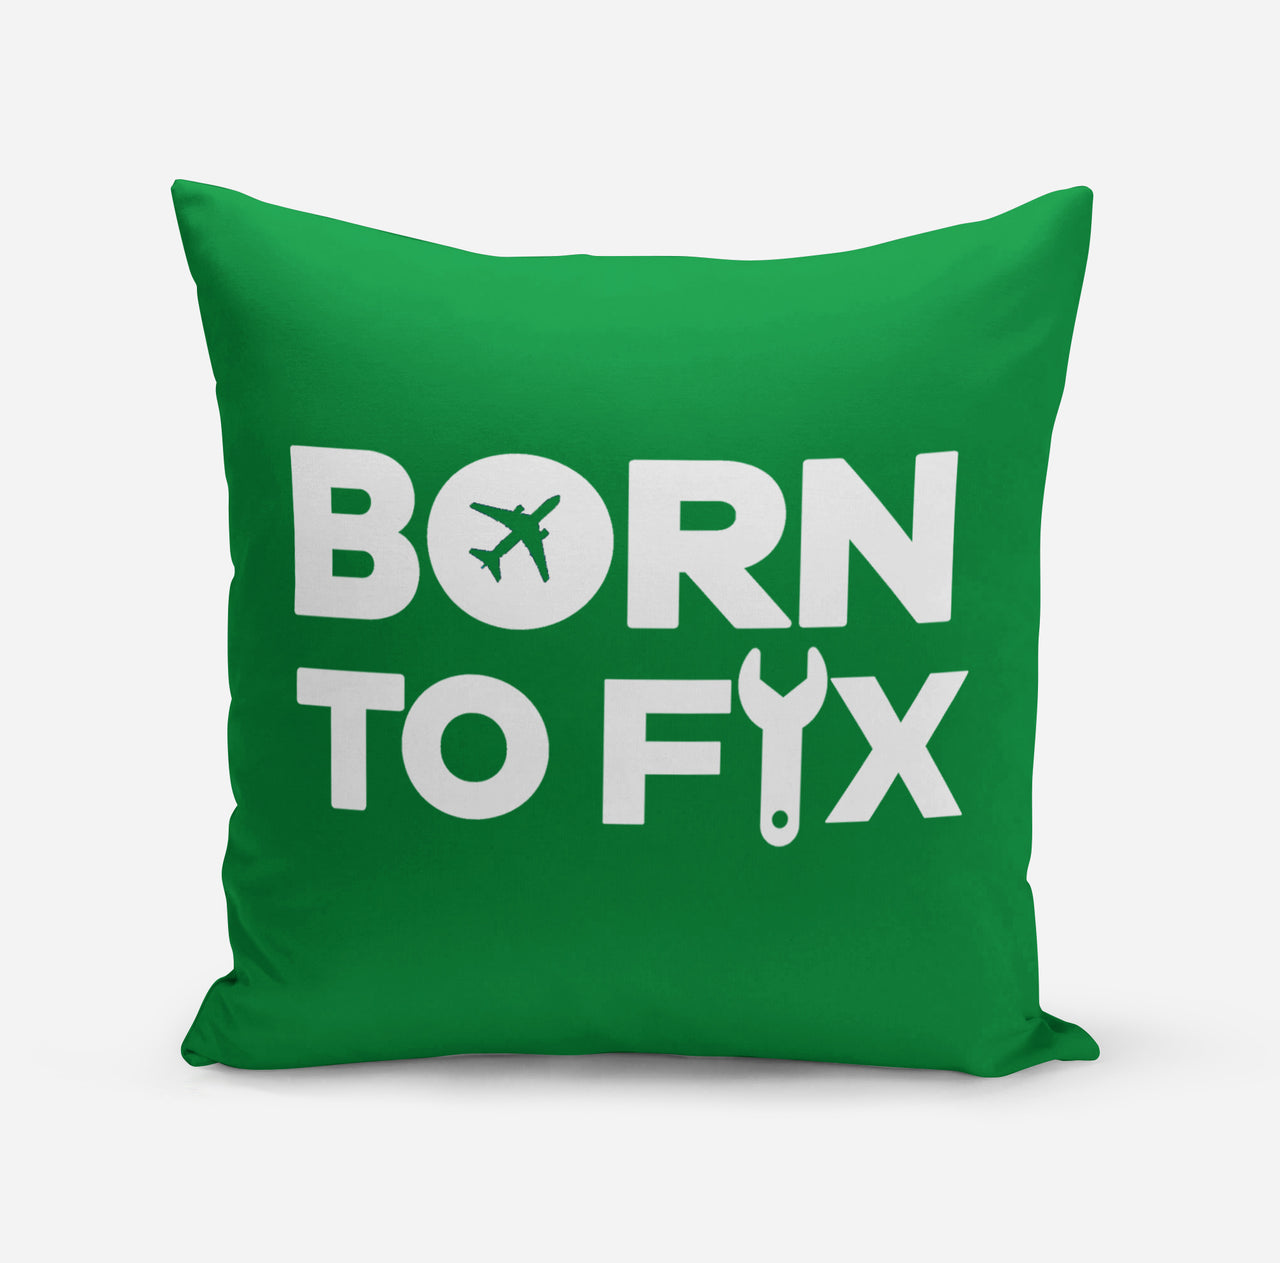 Born To Fix Airplanes Designed Pillows